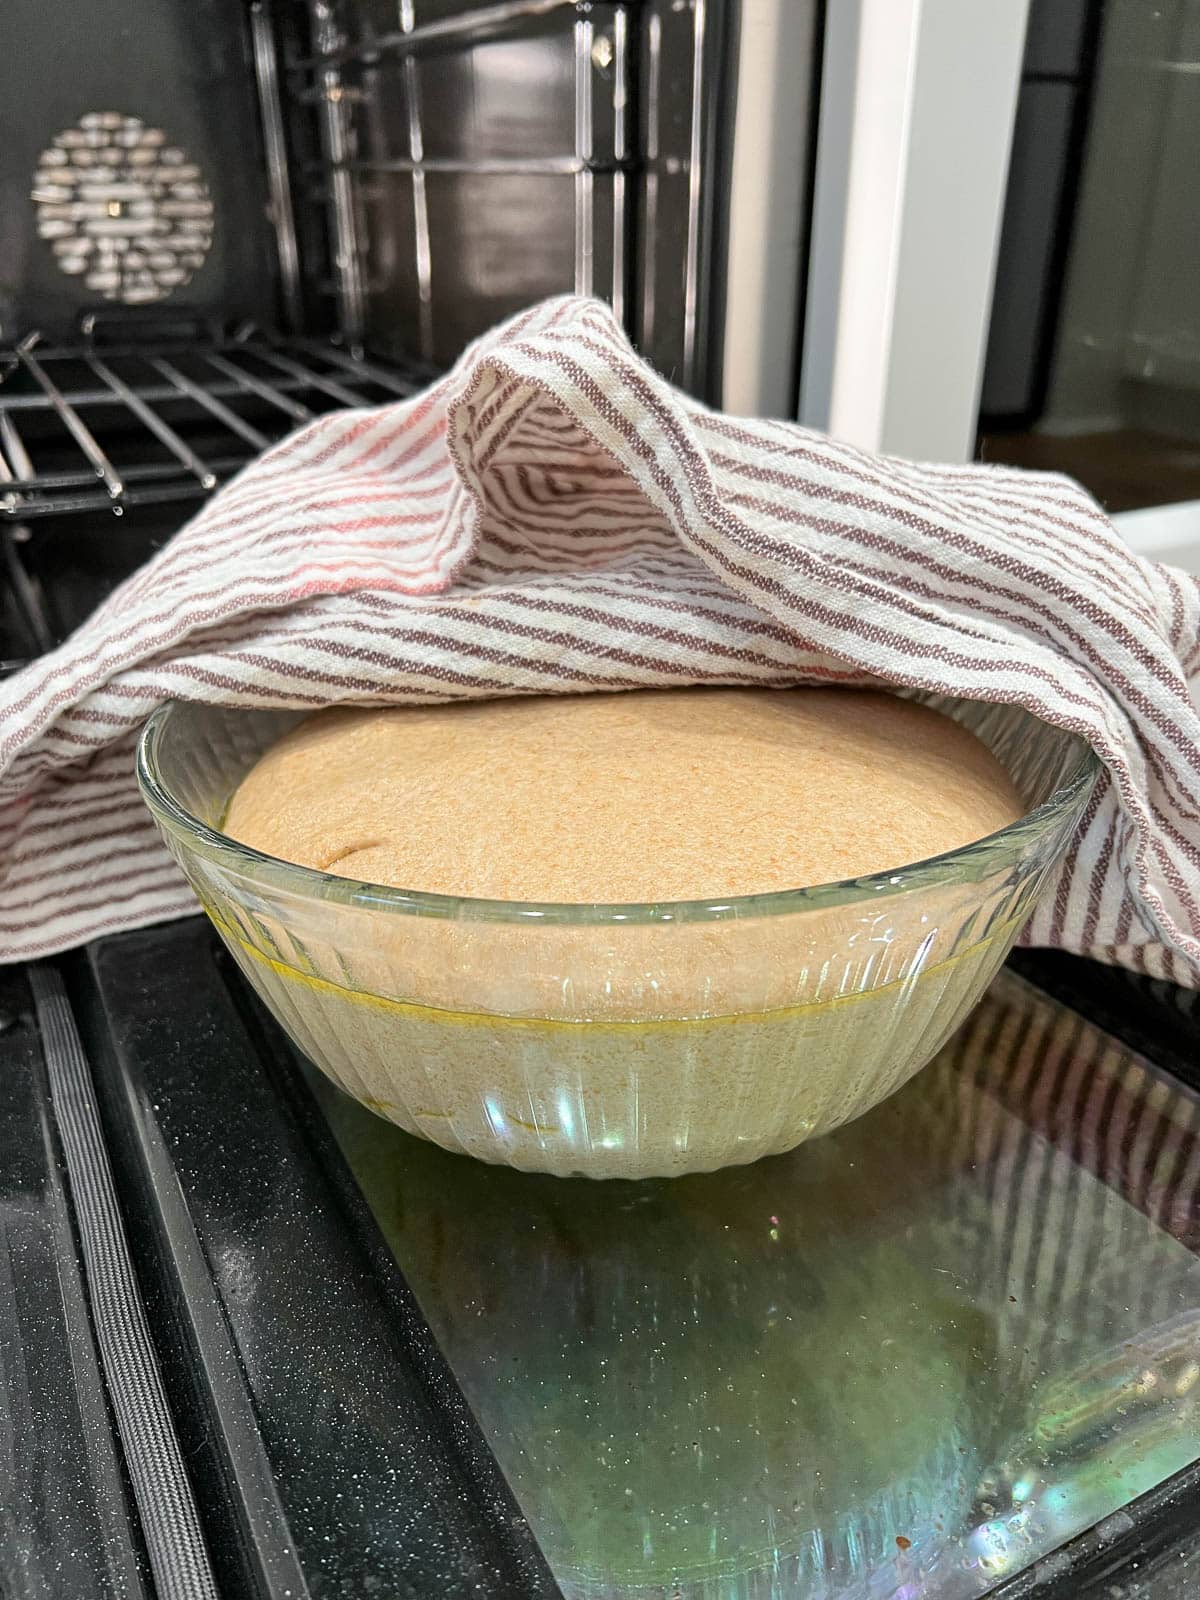 close up of bread dough in a glass bowl in front of an oven